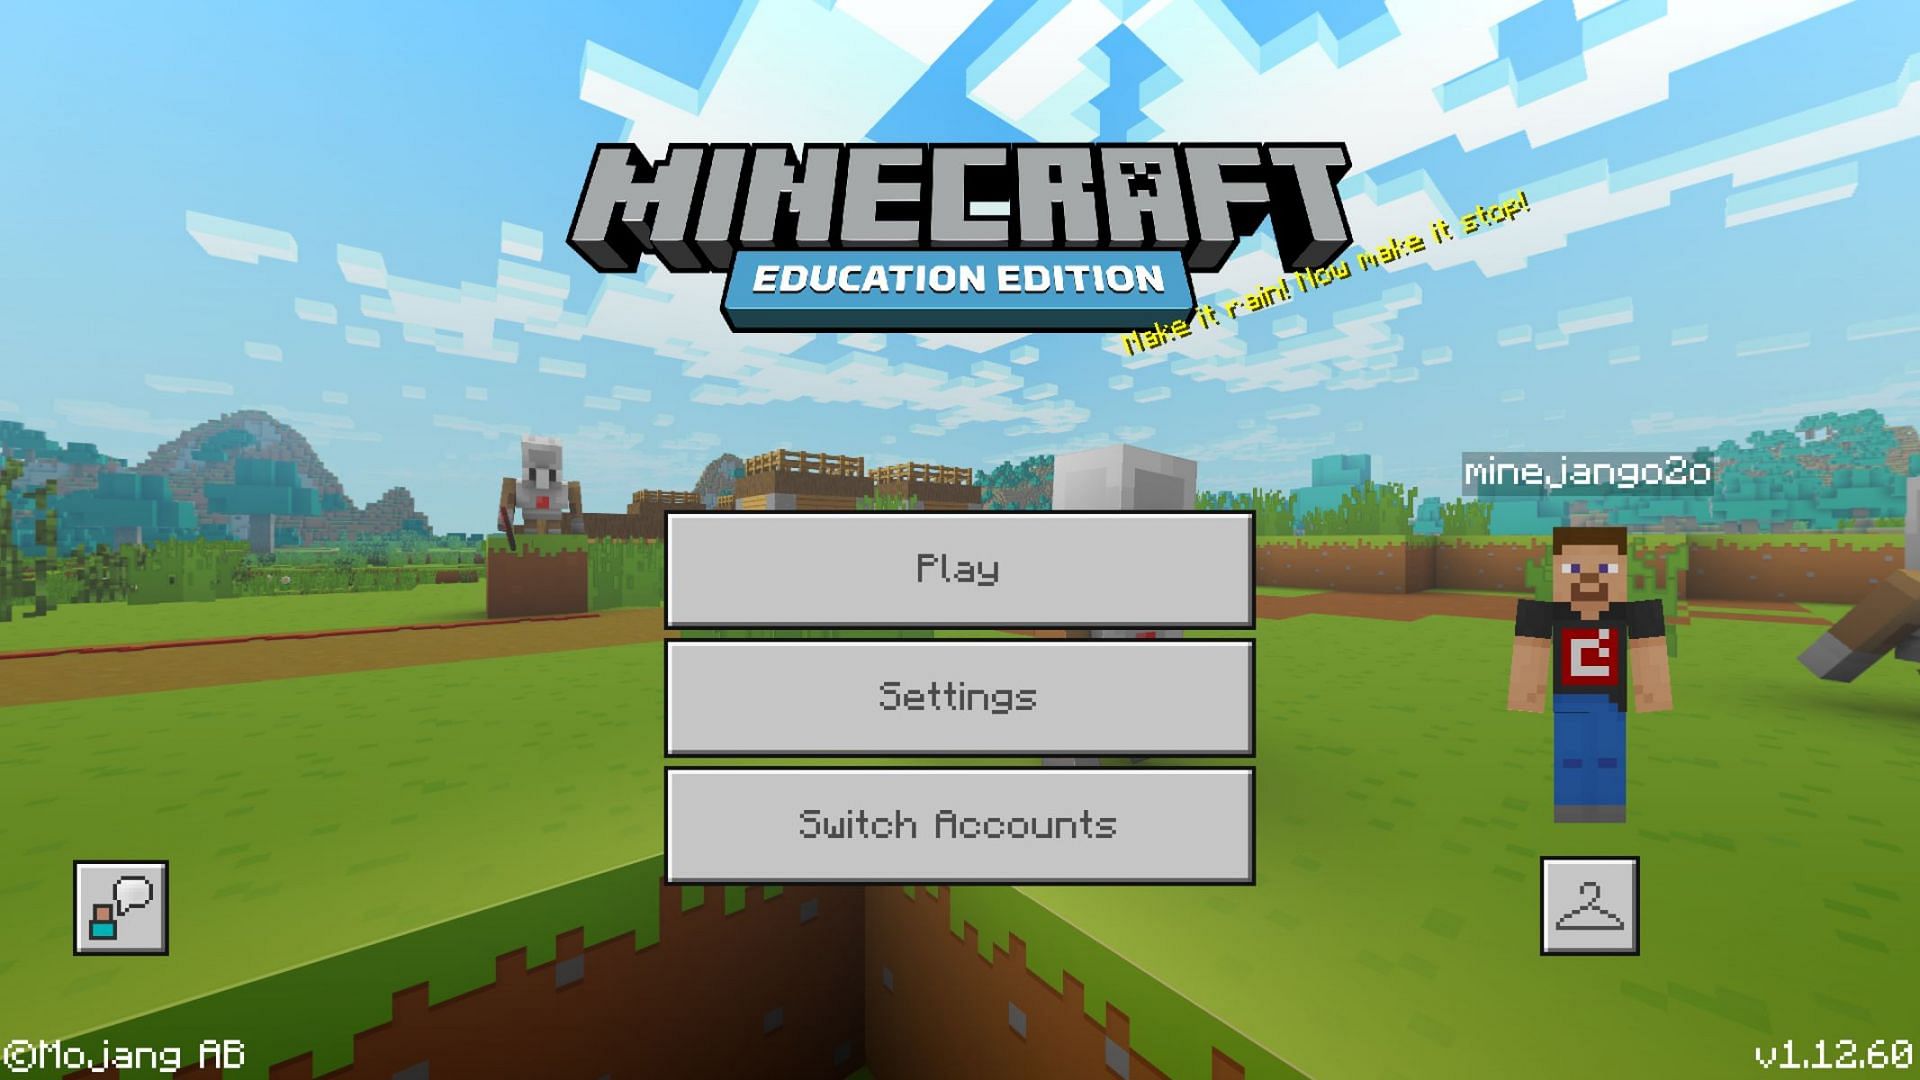 Minecraft Education Edition is a version of Minecraft designed to